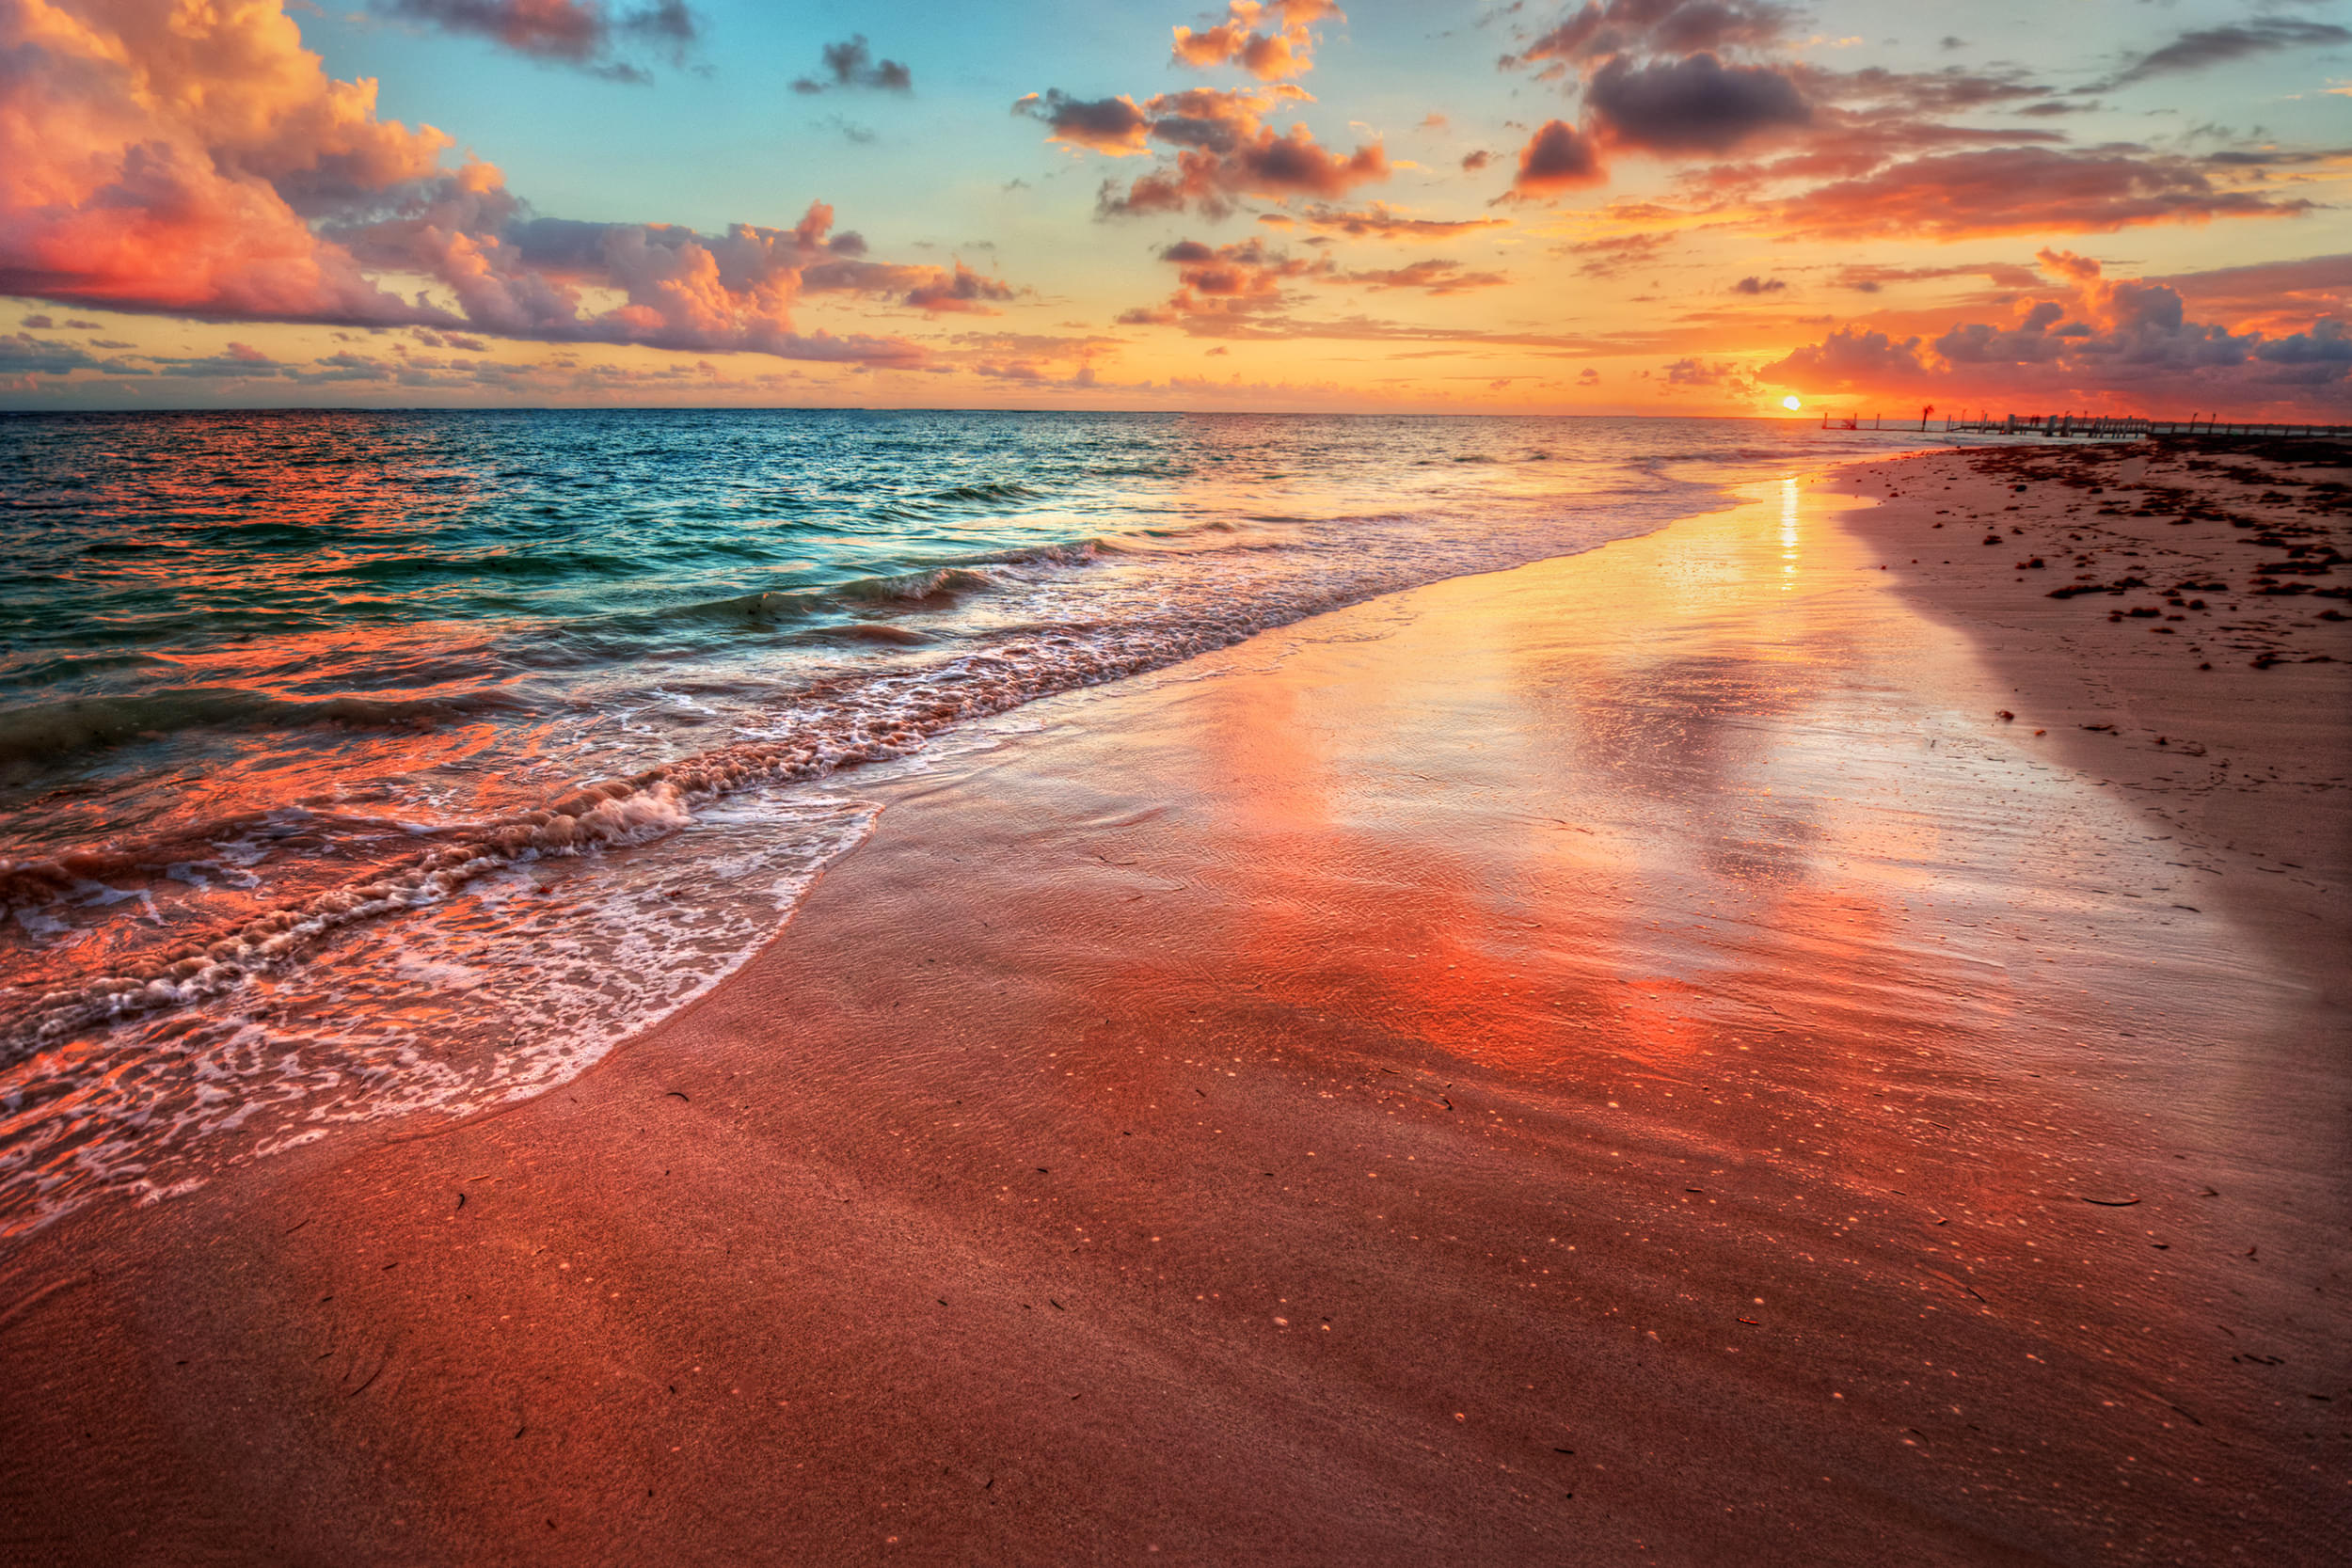 Catch a stunning sunset from the beach: